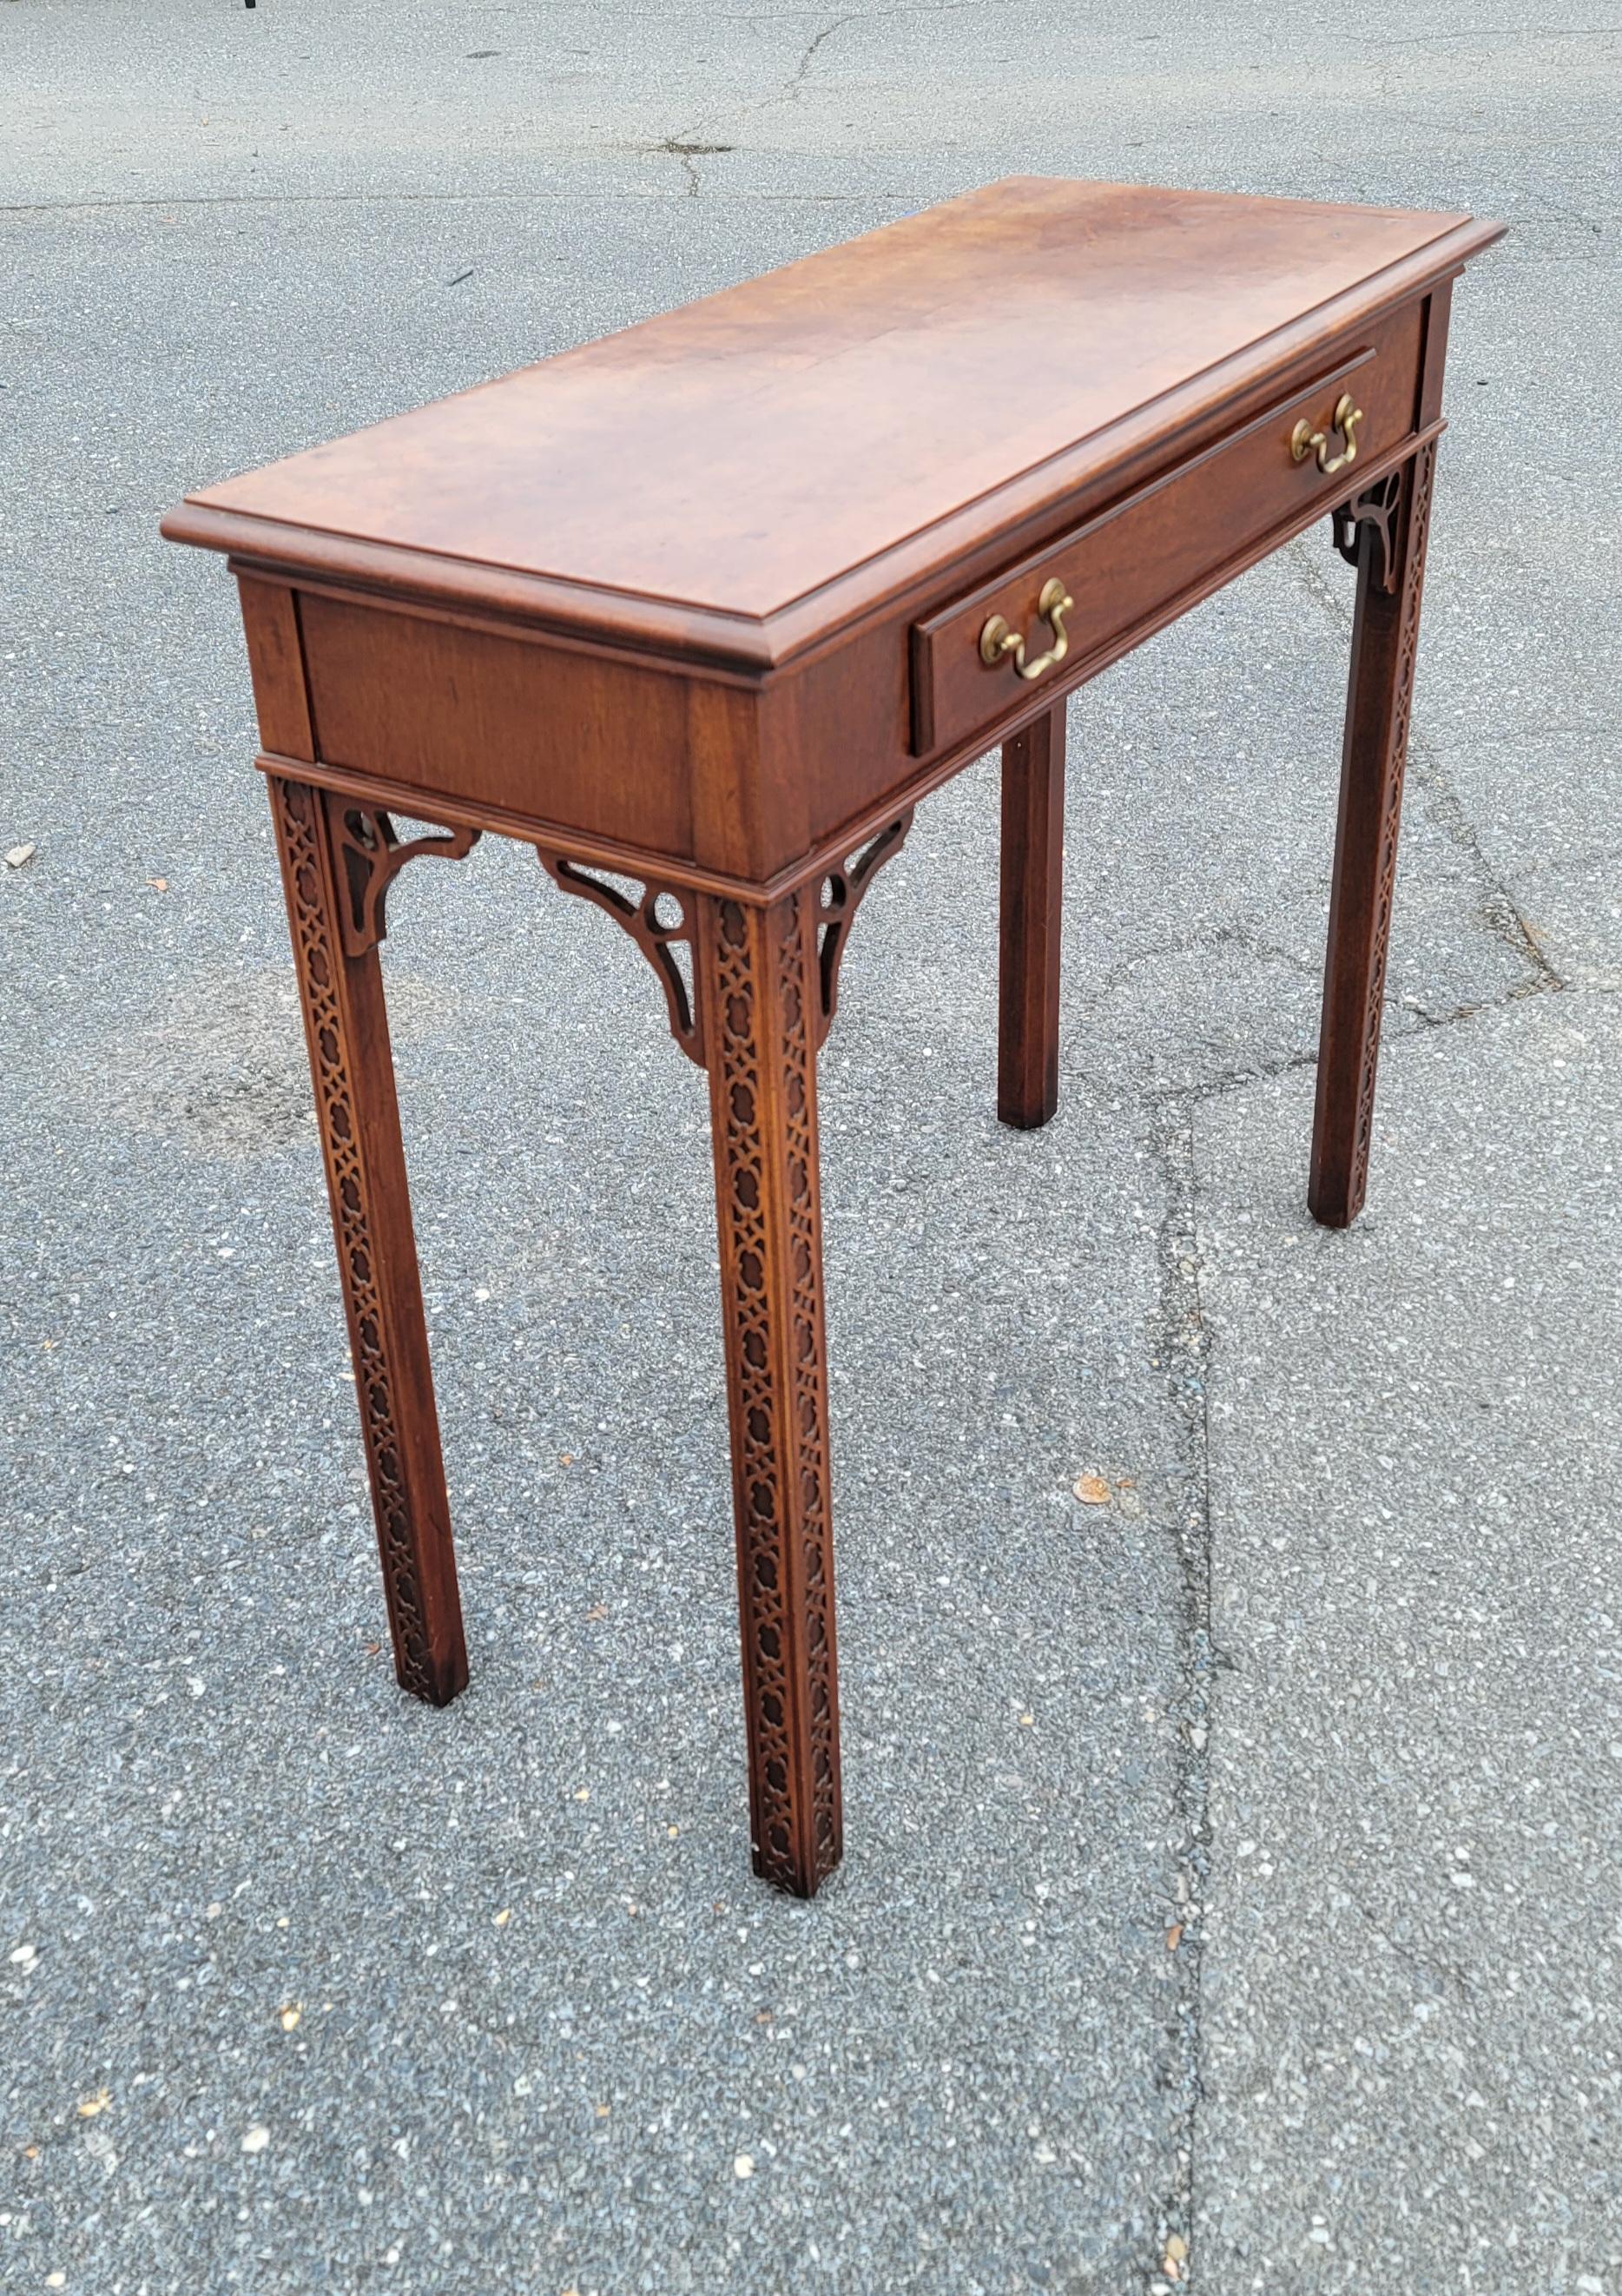 1970s Chippendale Walnut Burl Console Table with Fretwork and Banded Top For Sale 6